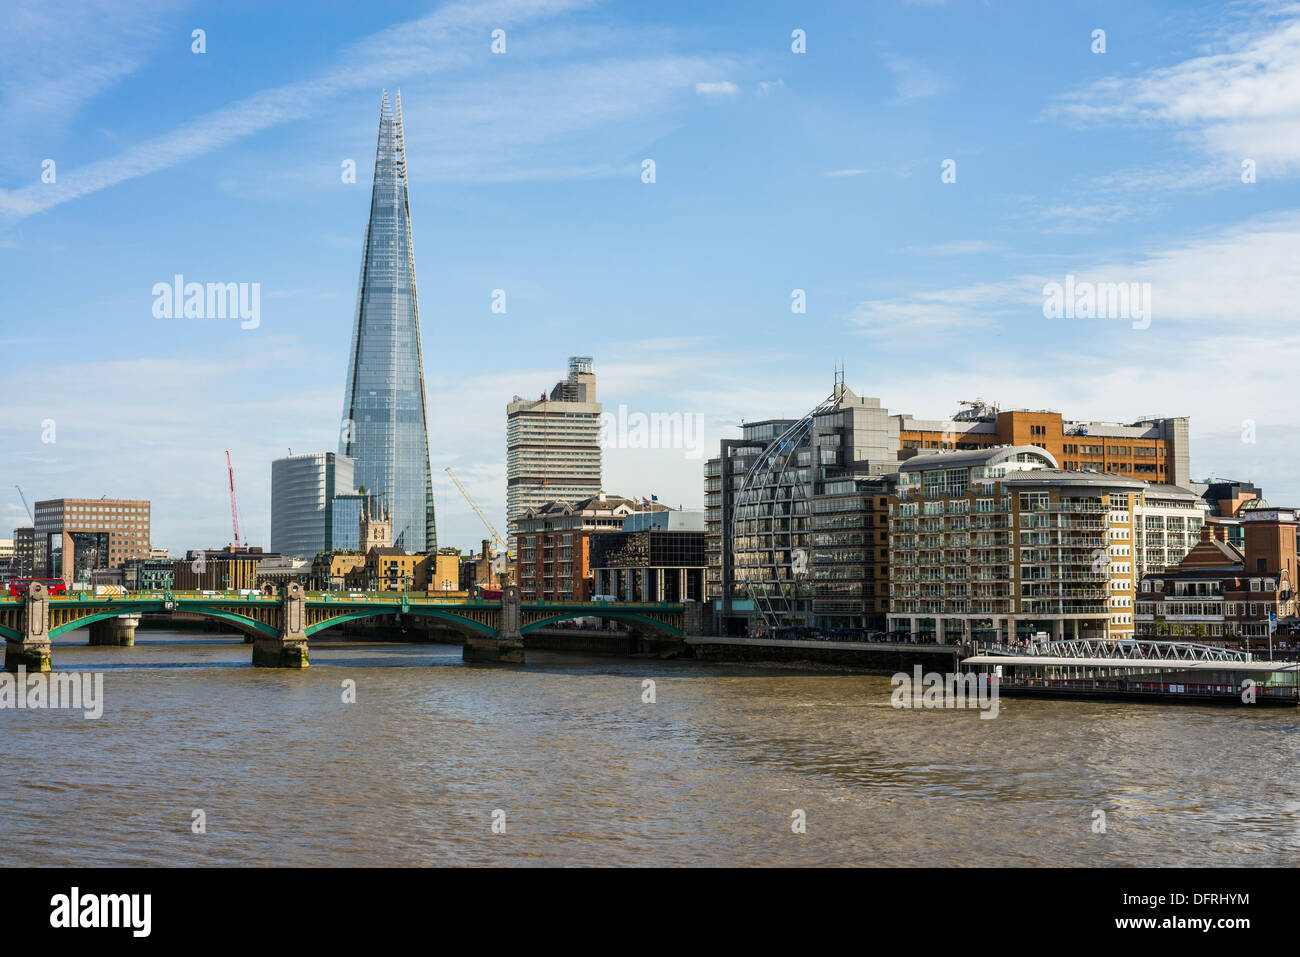 The Shard skyscraper and the River Thames, City of London, UK Stock Photo